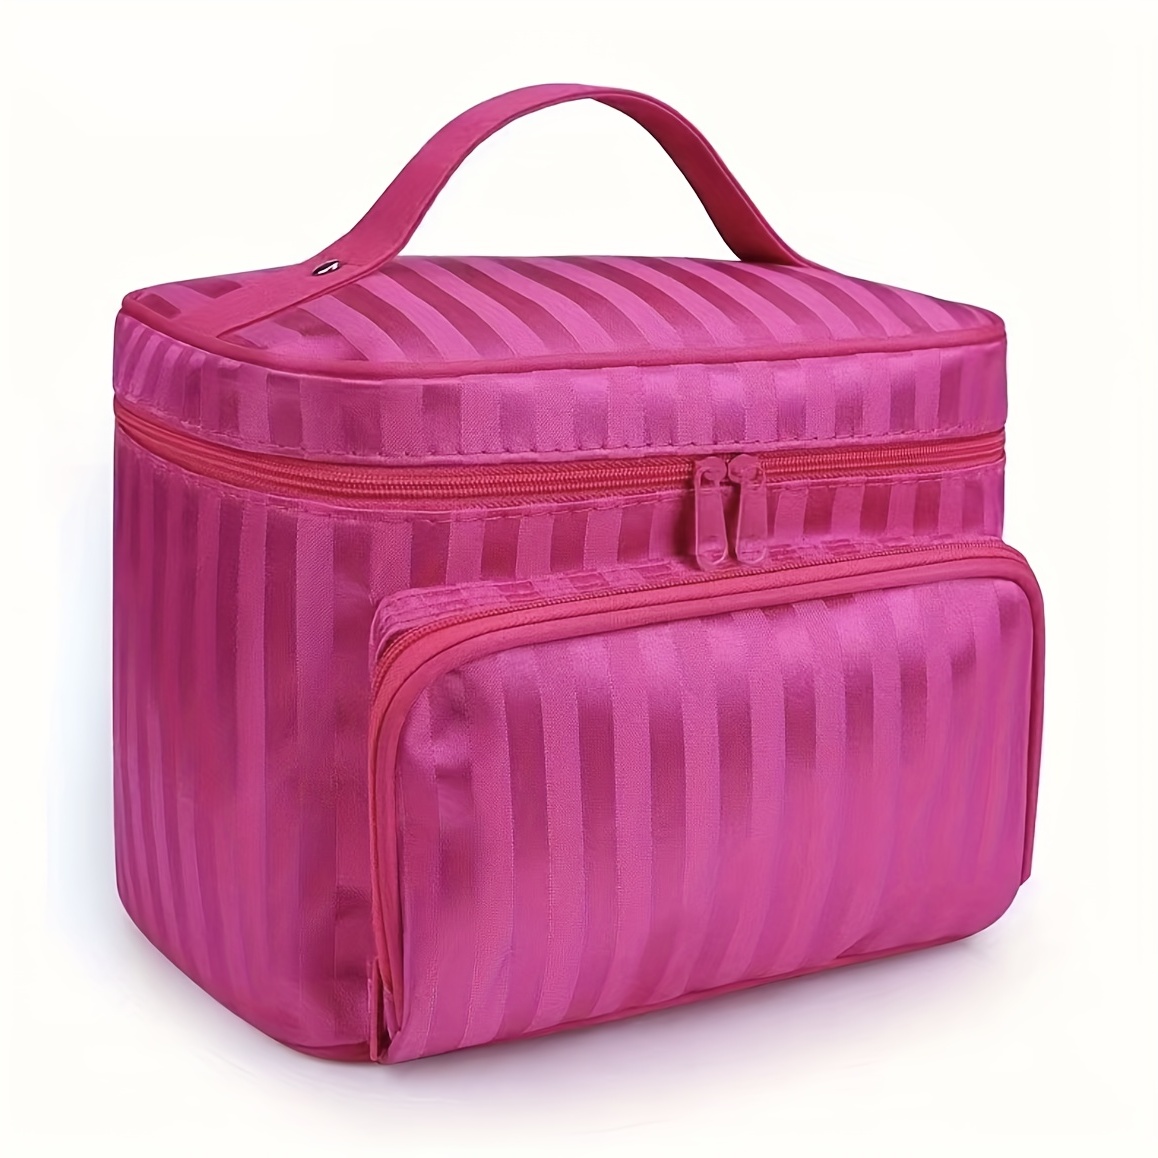 

Travel In Style: Portable Cosmetic Bag With Top Handle & Large Capacity - Perfect For Women On The Go!